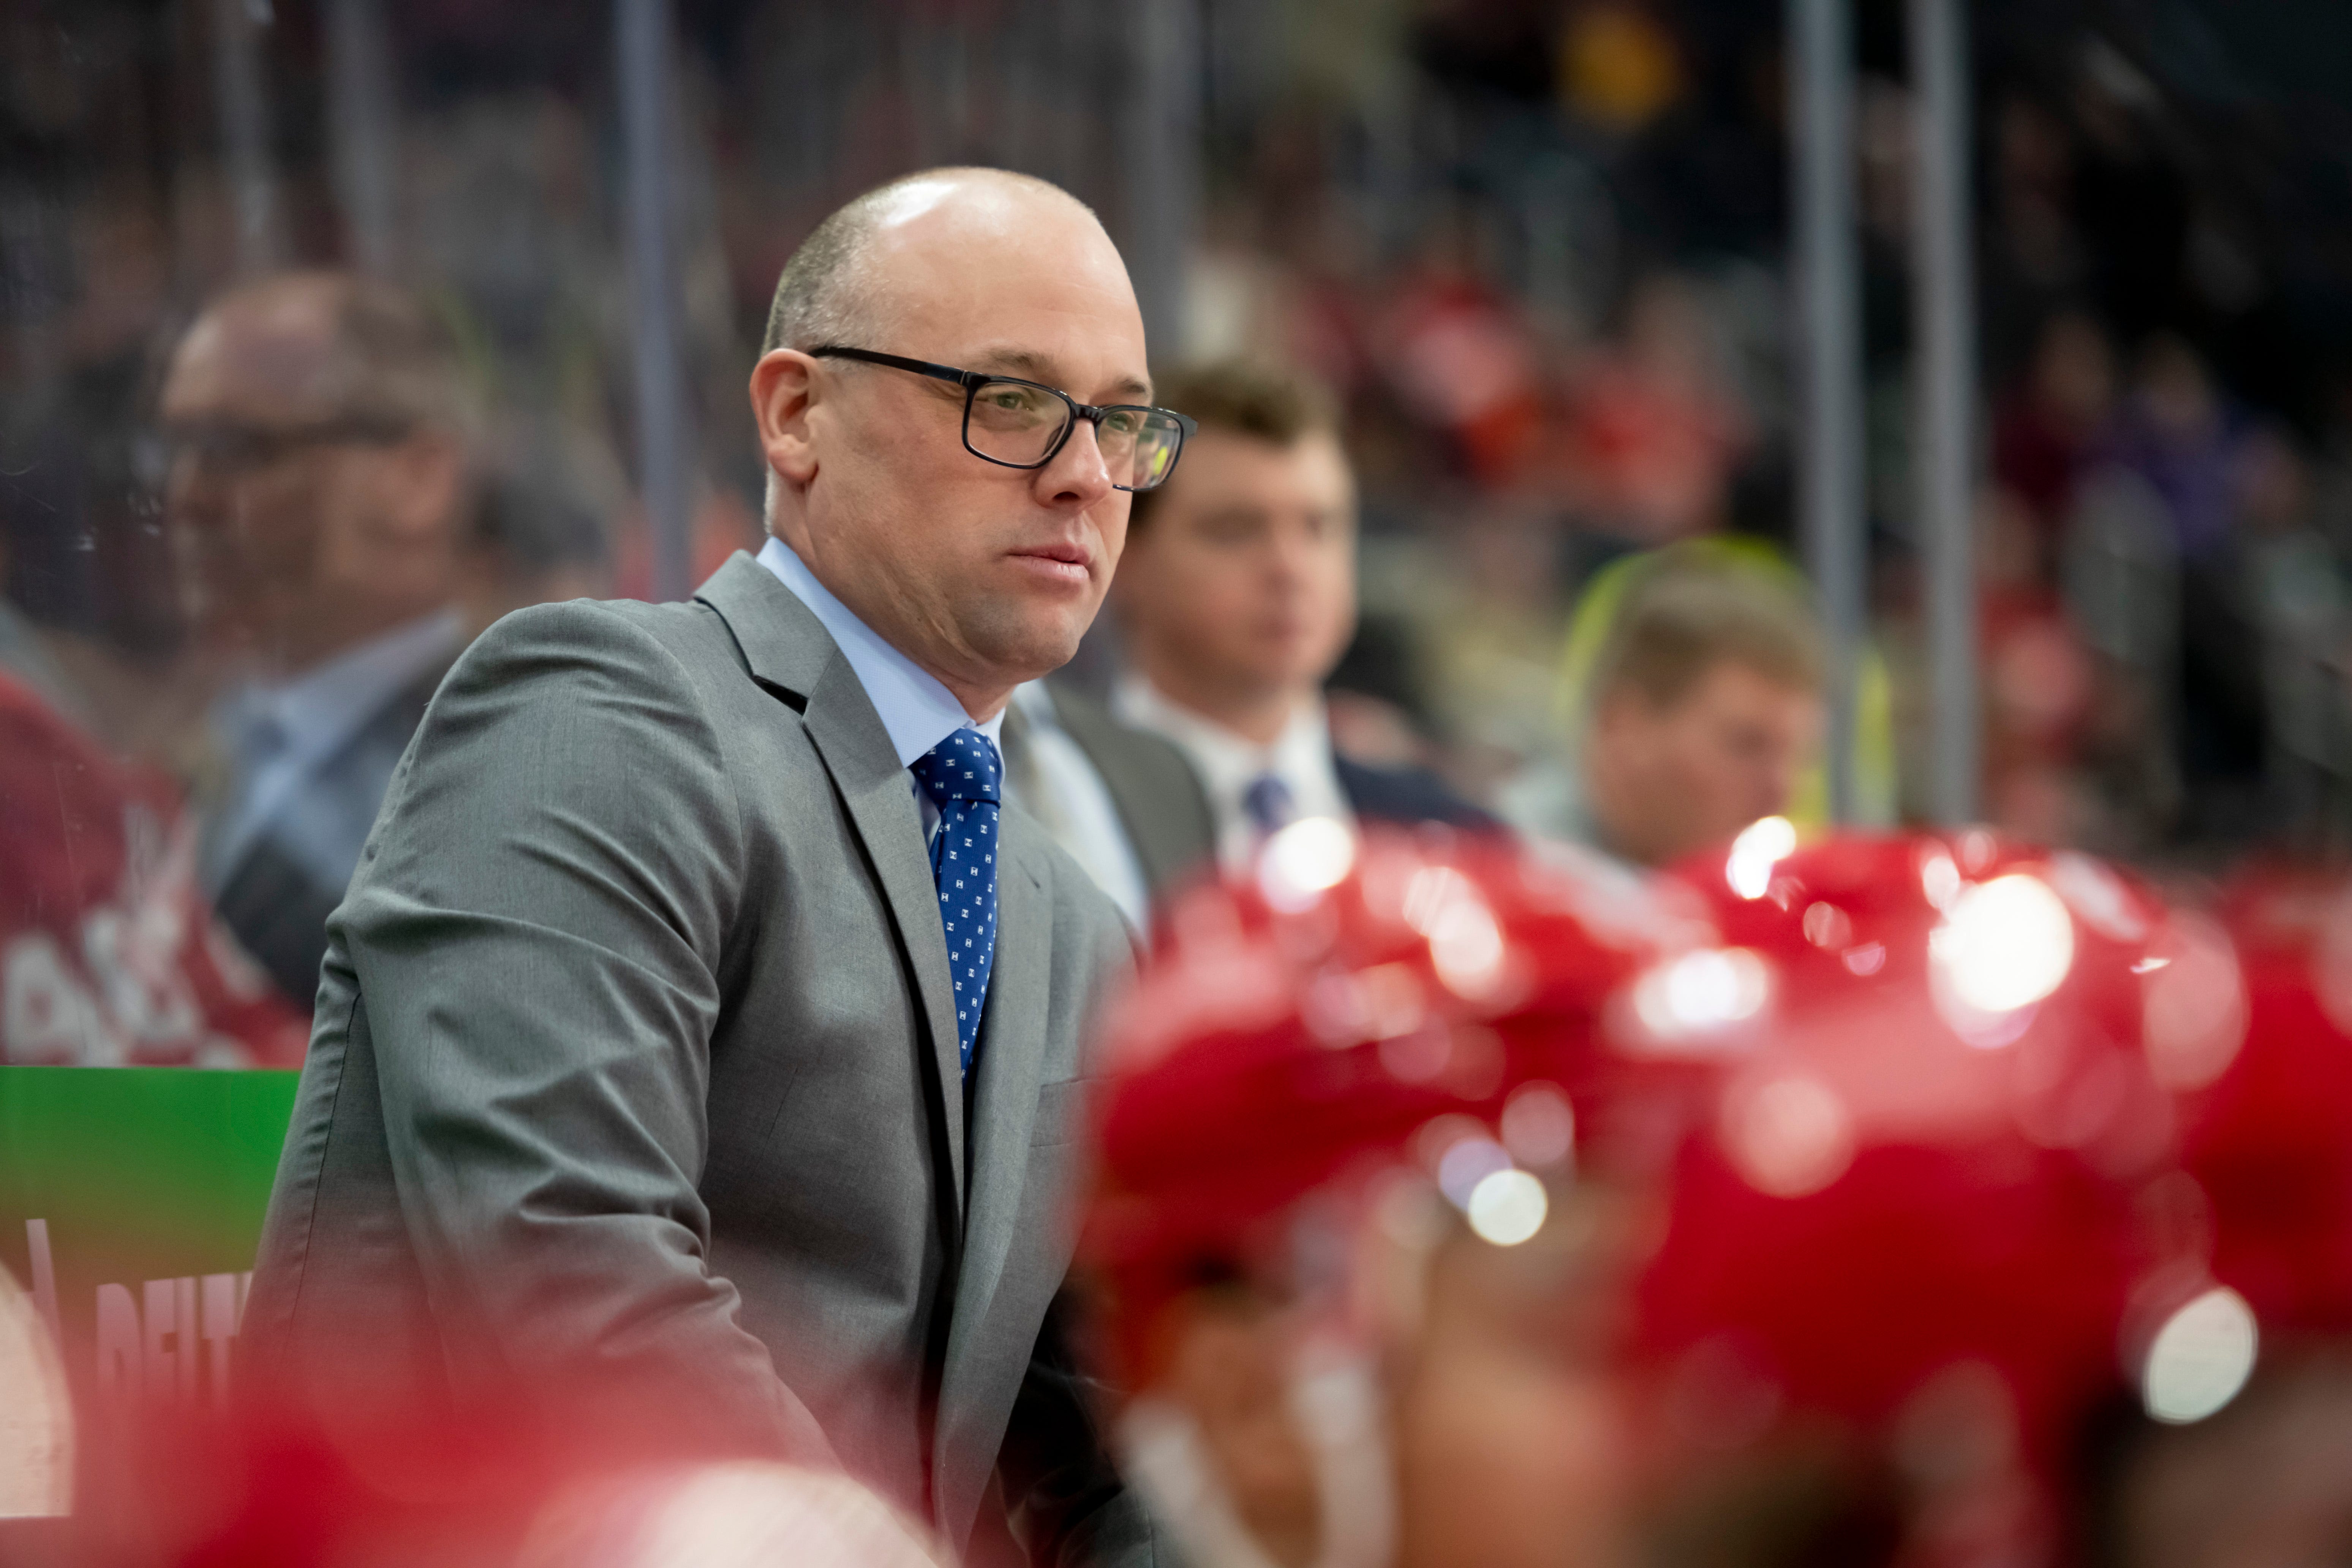 COACHES – It was a terrible season but there’s only so much blame that you can assign to Jeff Blashill and his assistants. There simply wasn’t much talent on this roster. No coach could have gotten much more out of this lineup. The continued ineffectiveness of the specialty teams is a head-scratcher, but again, the overall talent was lacking most nights. Blashill deserved one more season, and he got it, but there has to be improvement in 2020-21. GRADE: D.